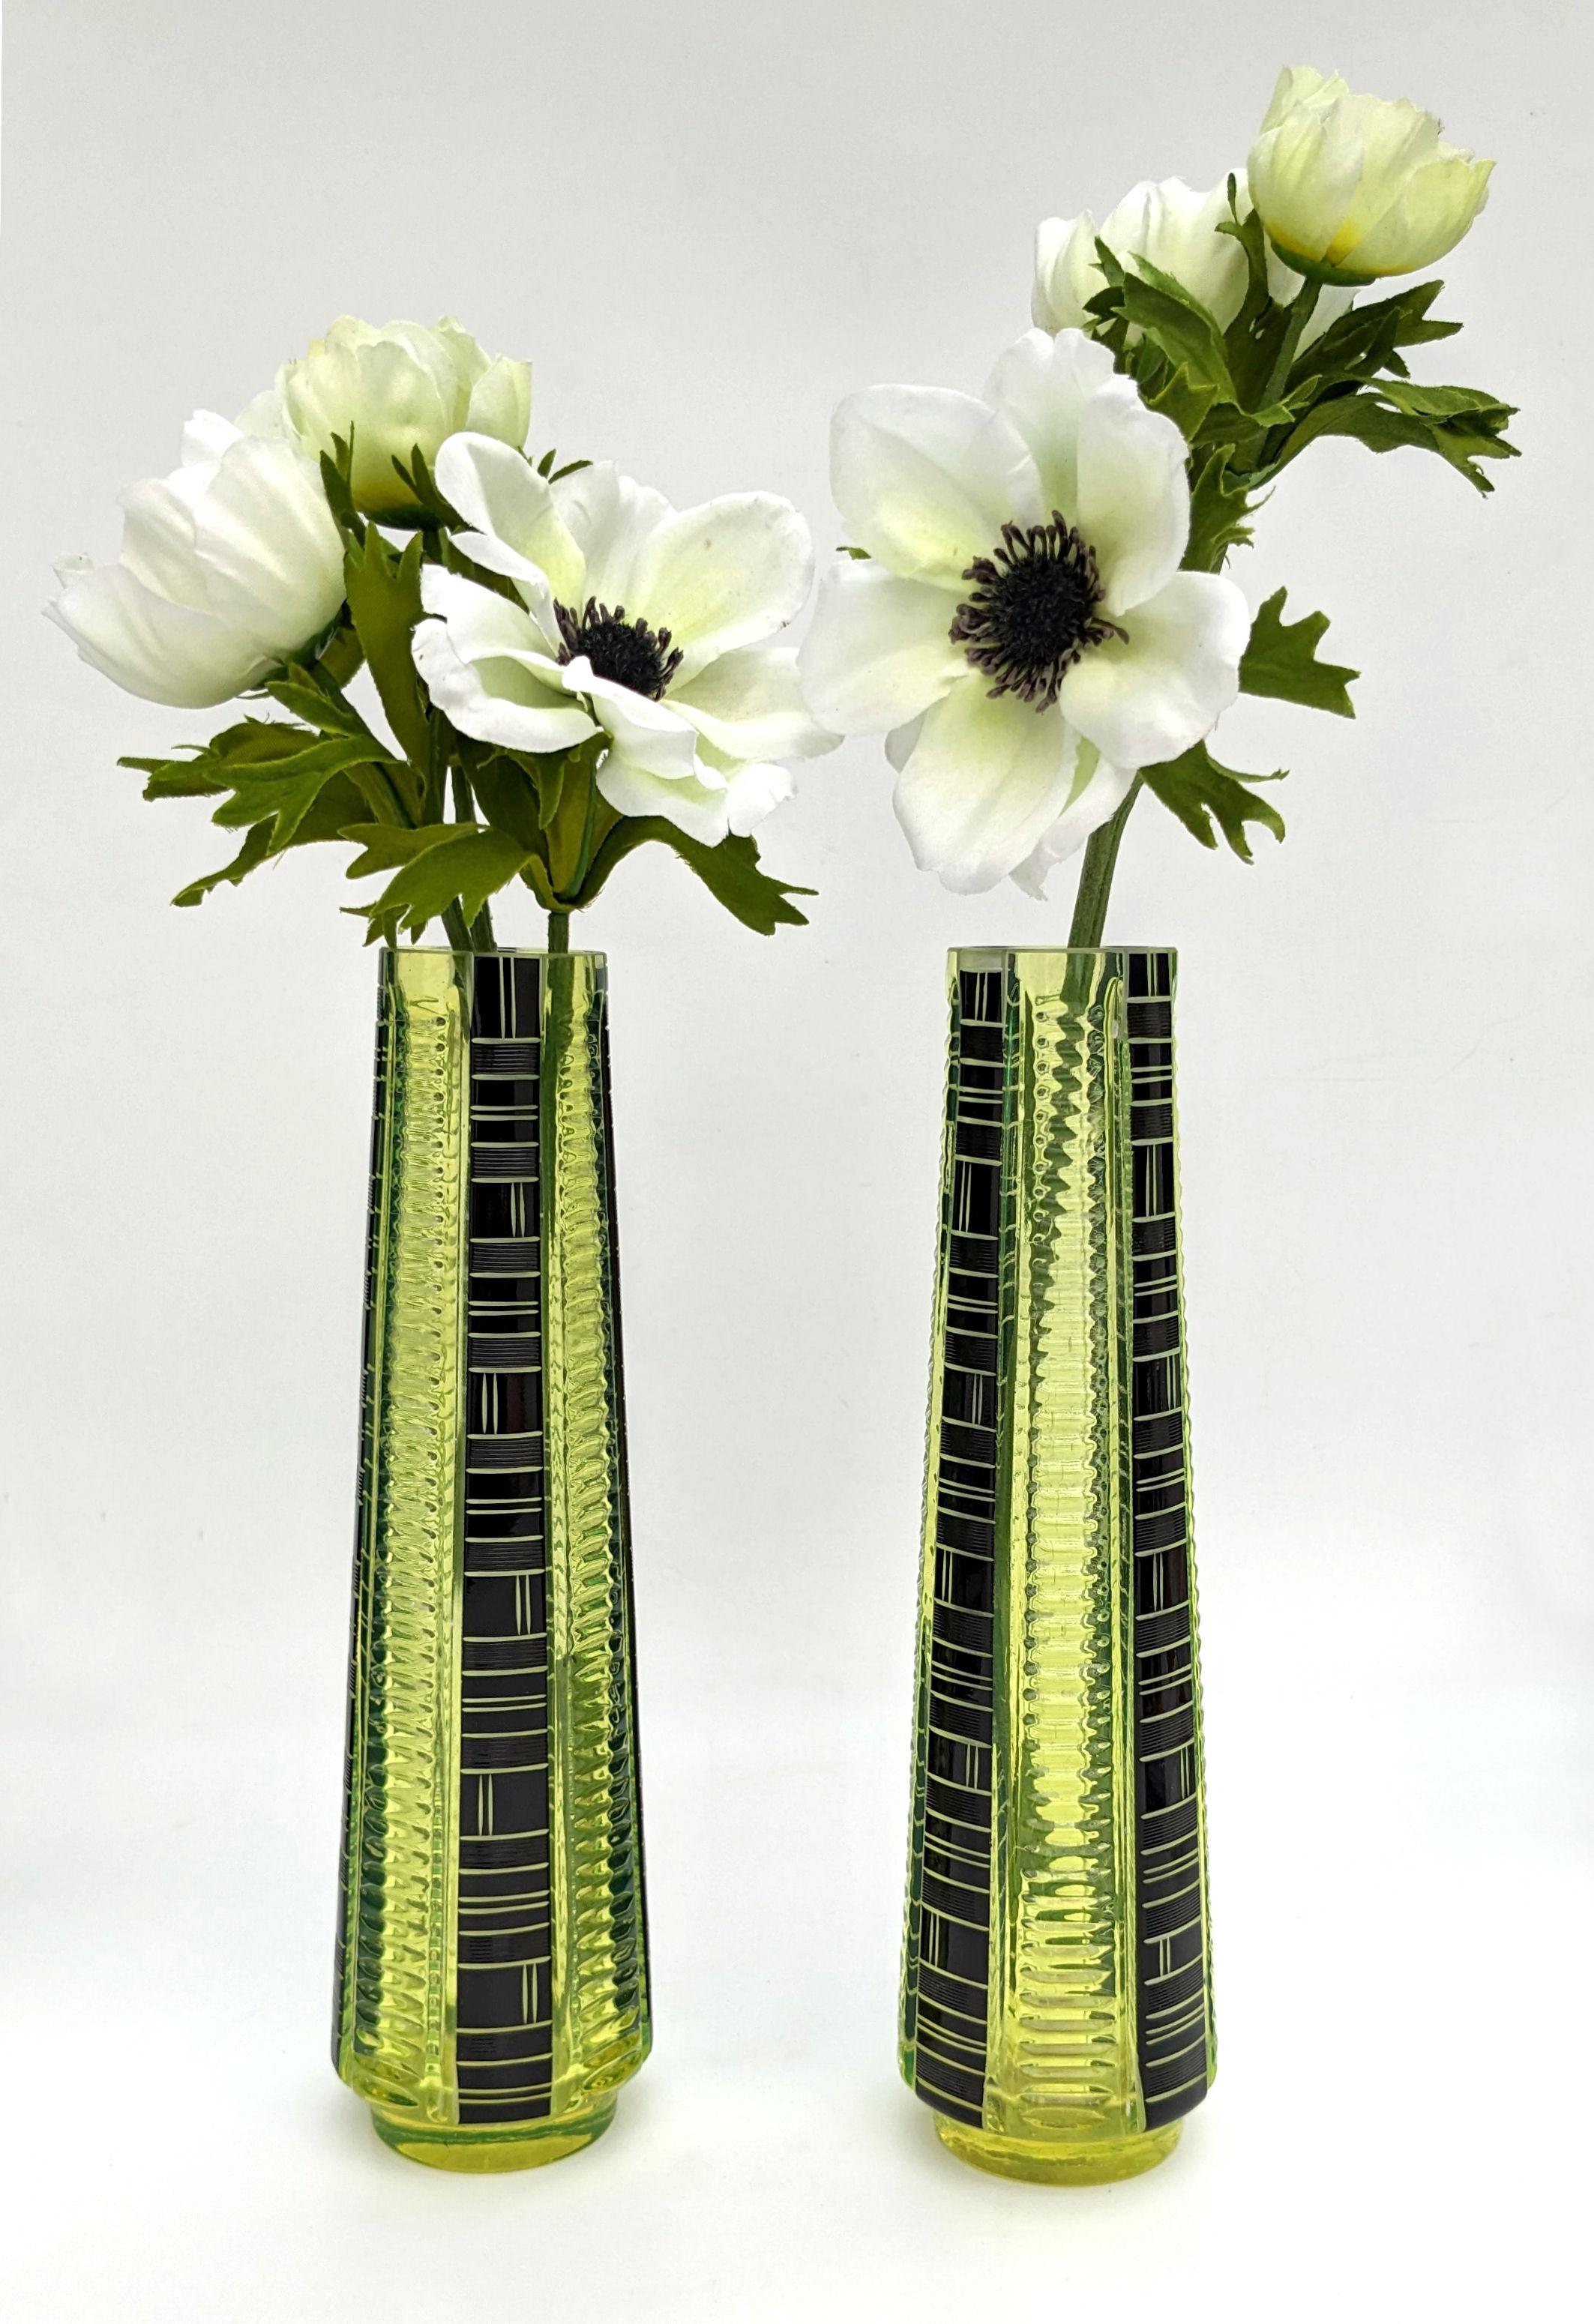 Art Deco Pair Of Tall Uranium Glass Vases By Karl Palda, c1930 For Sale 3